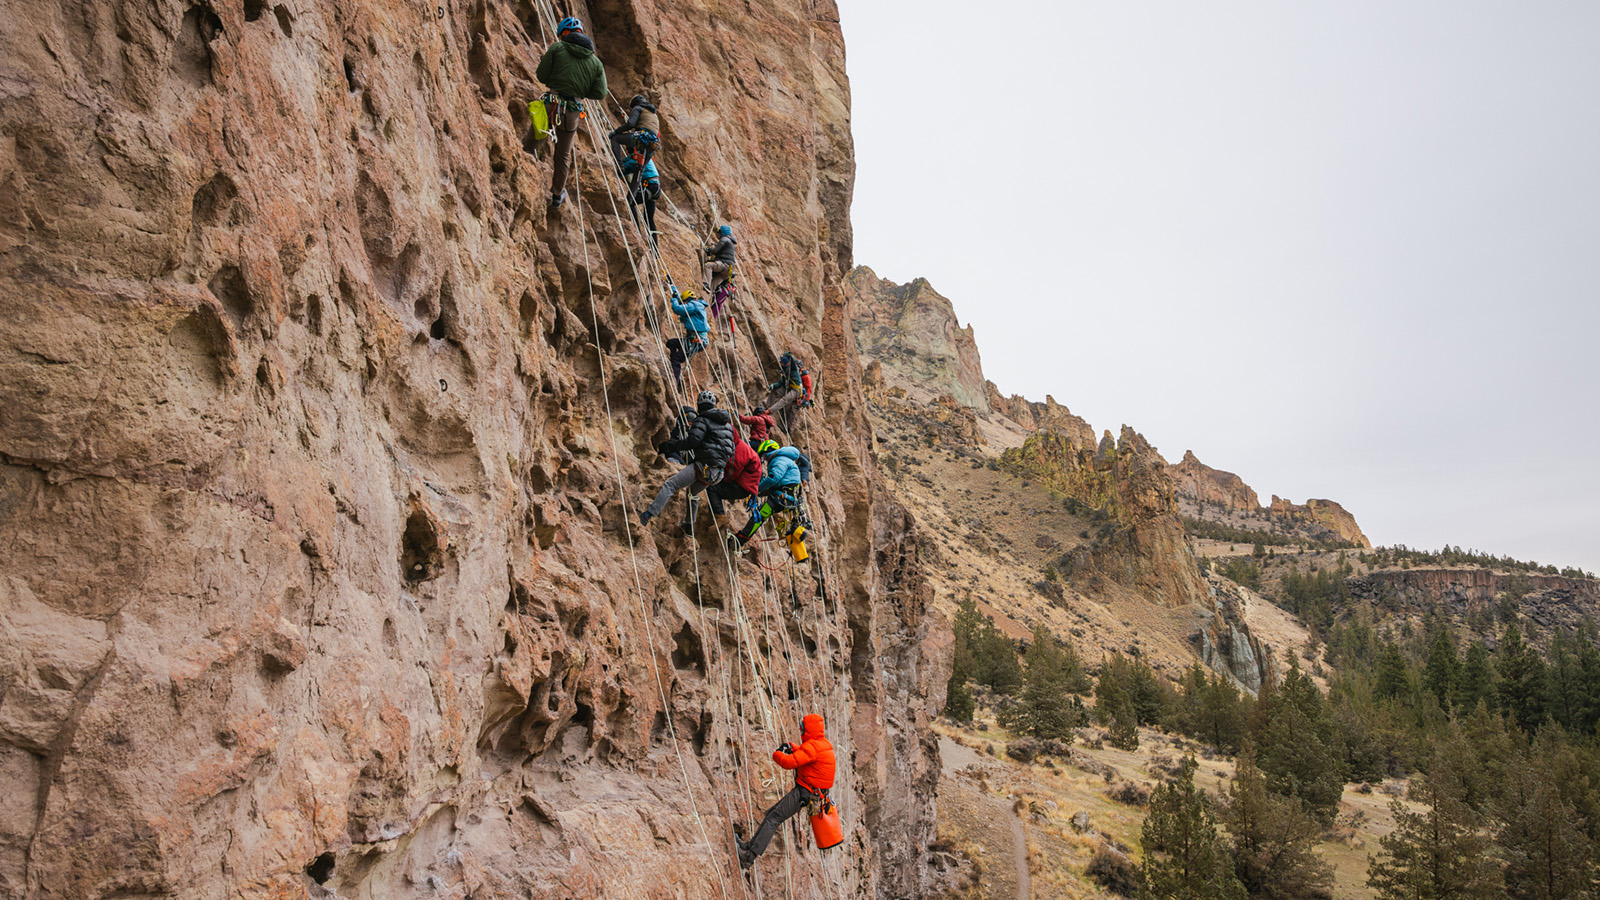 Rebolting climbing routes at Smith Rock State Park